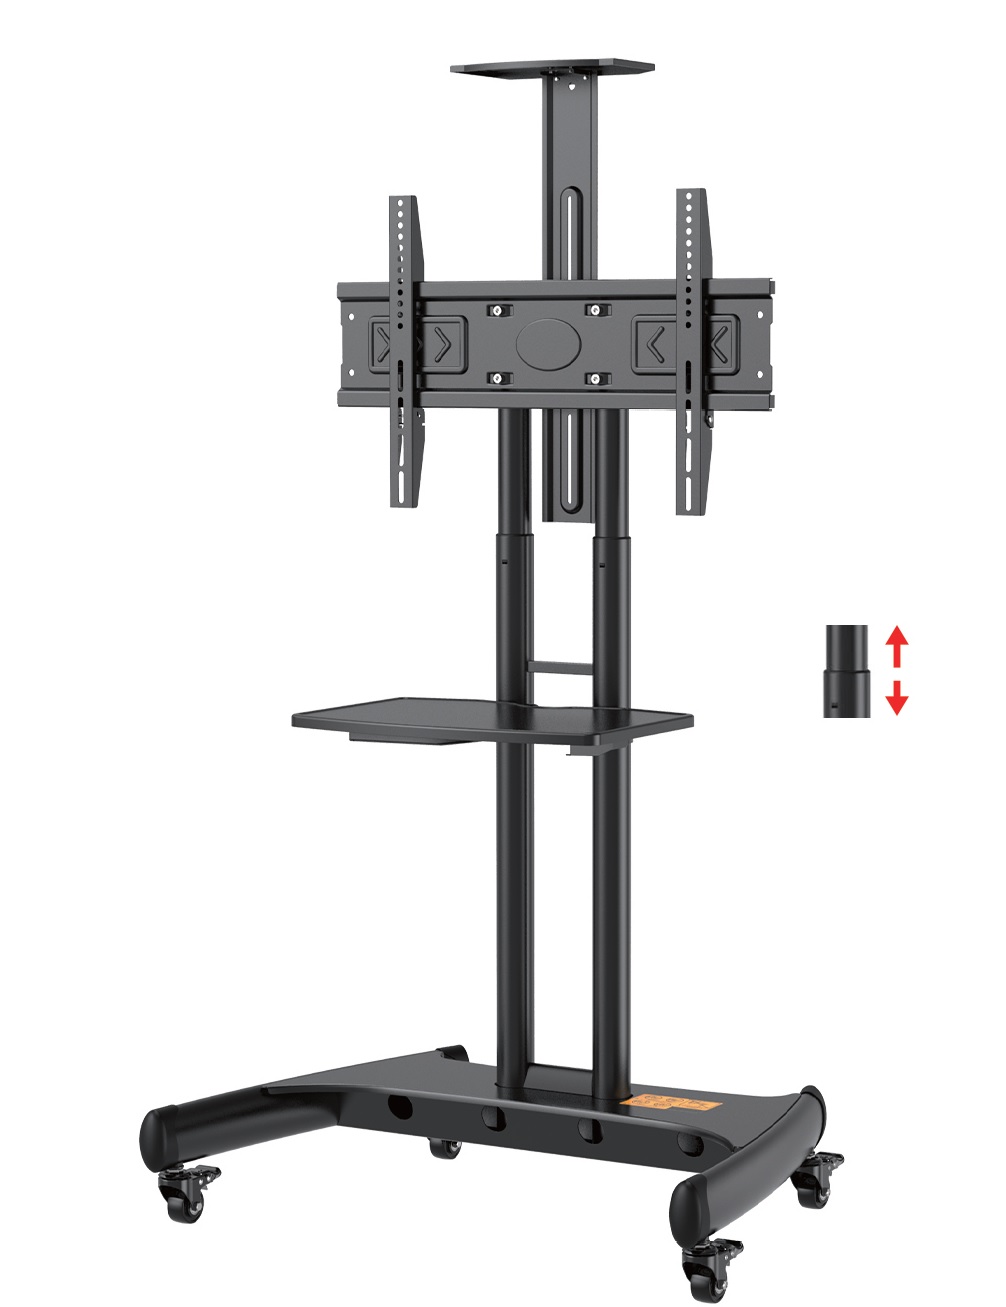 Tv Trolley - Model AVA1500-60-1P - With Wheels Movable For LCD - LED Flat or Curved Screen for 32-70 Inch Height Adjustable Rolling, weight capacity Up to 45.5 KG- Floor TV Stand with Tray